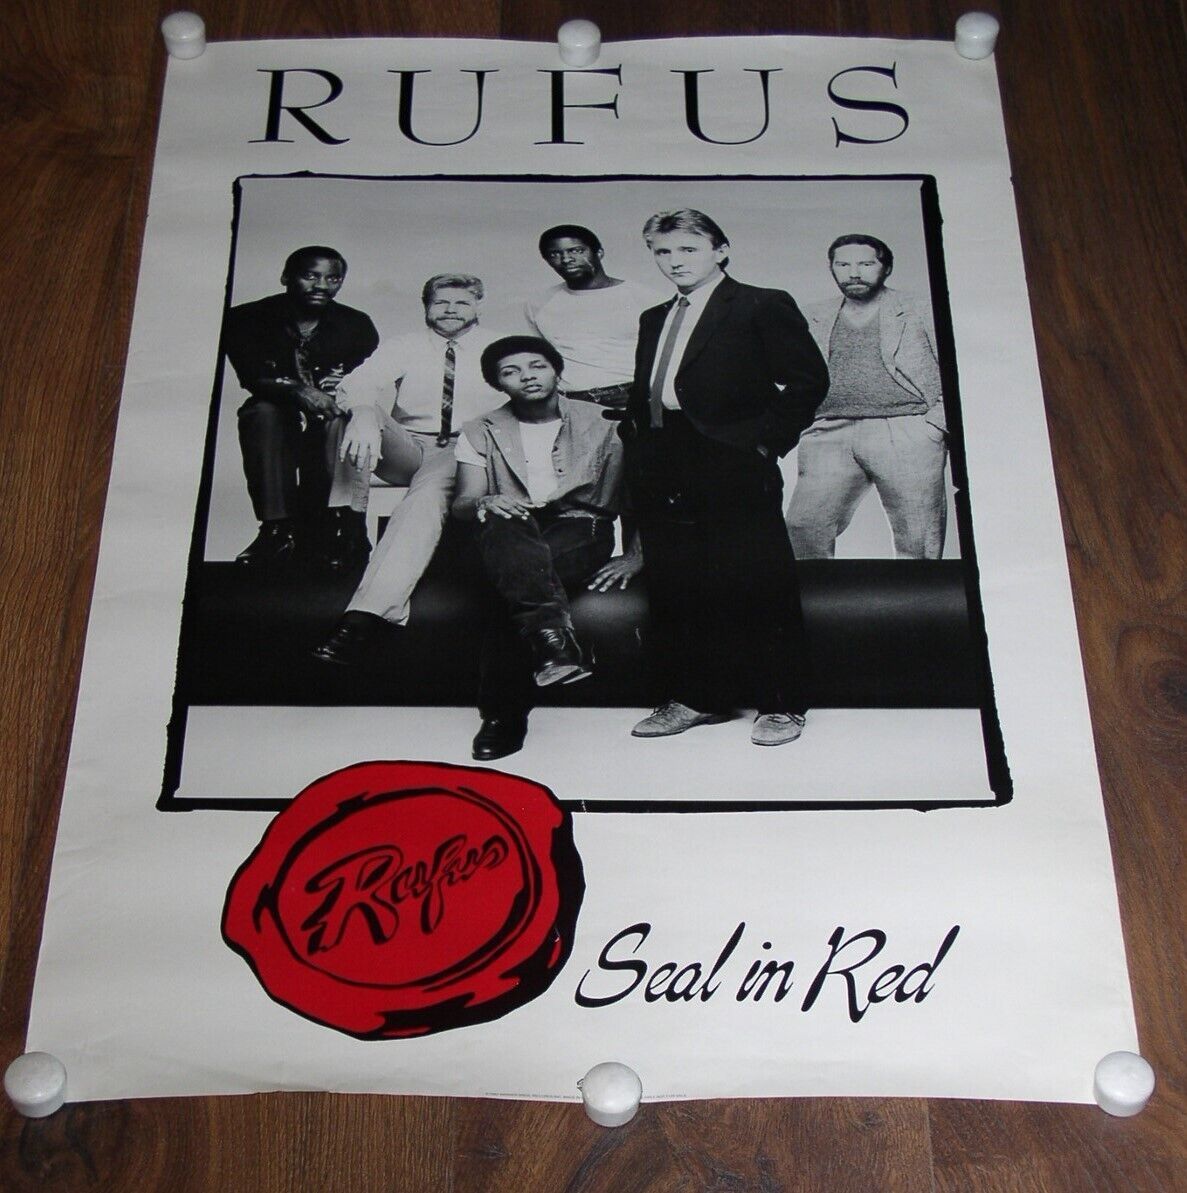 Primary image for RUFUS PROMO POSTER VINTAGE 1983 SEAL IN RED WARNER BROS.